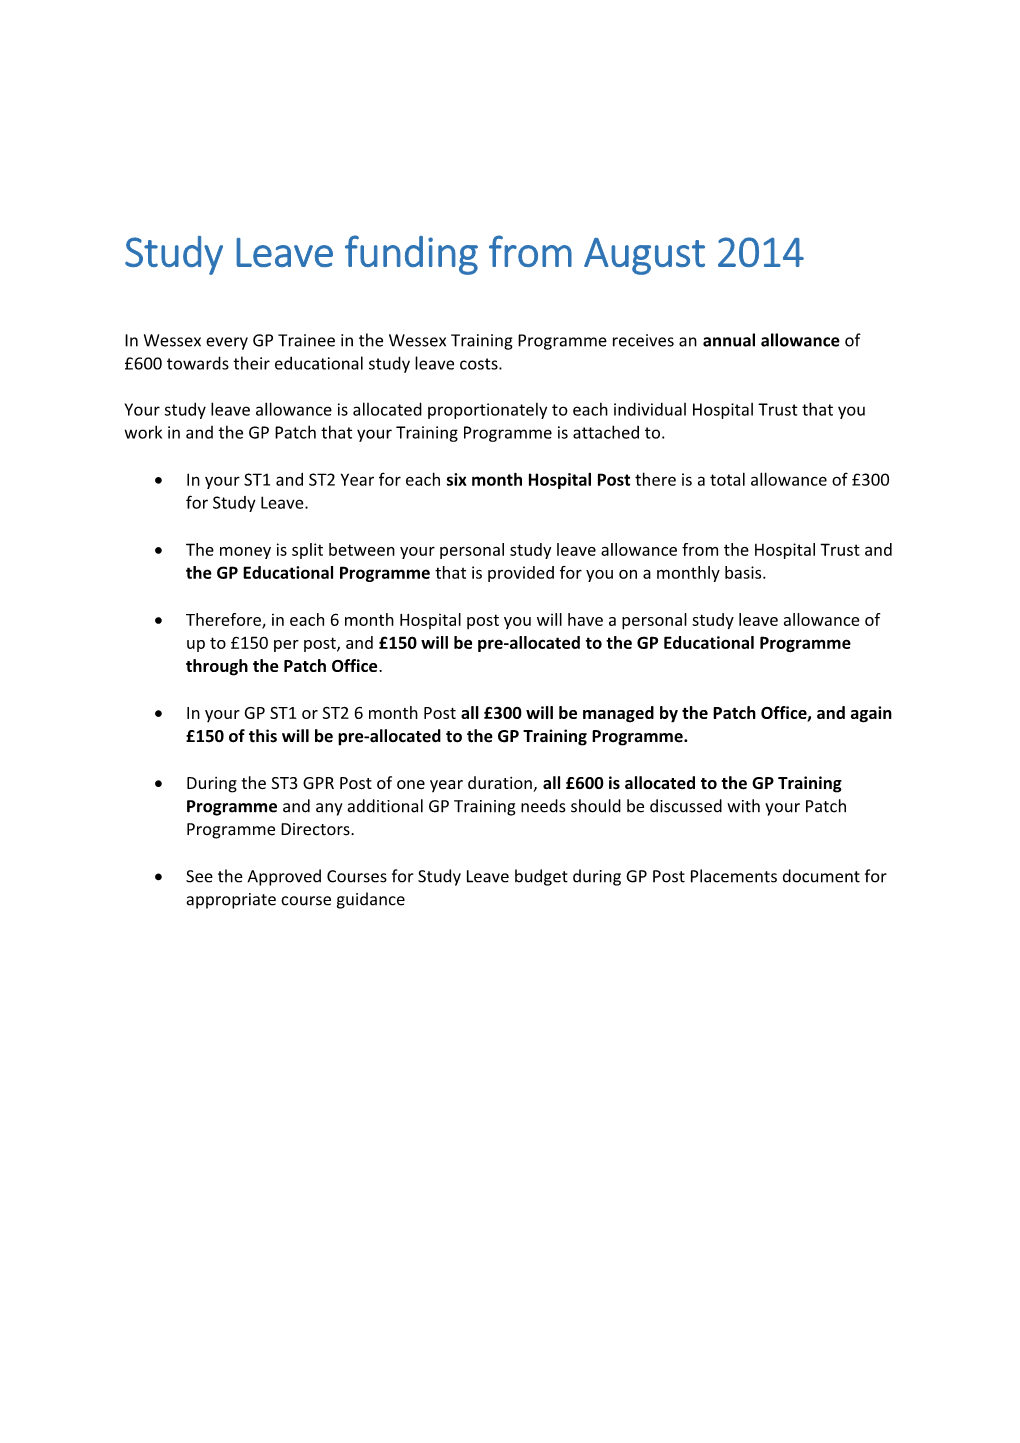 Study Leave Funding from August 2014